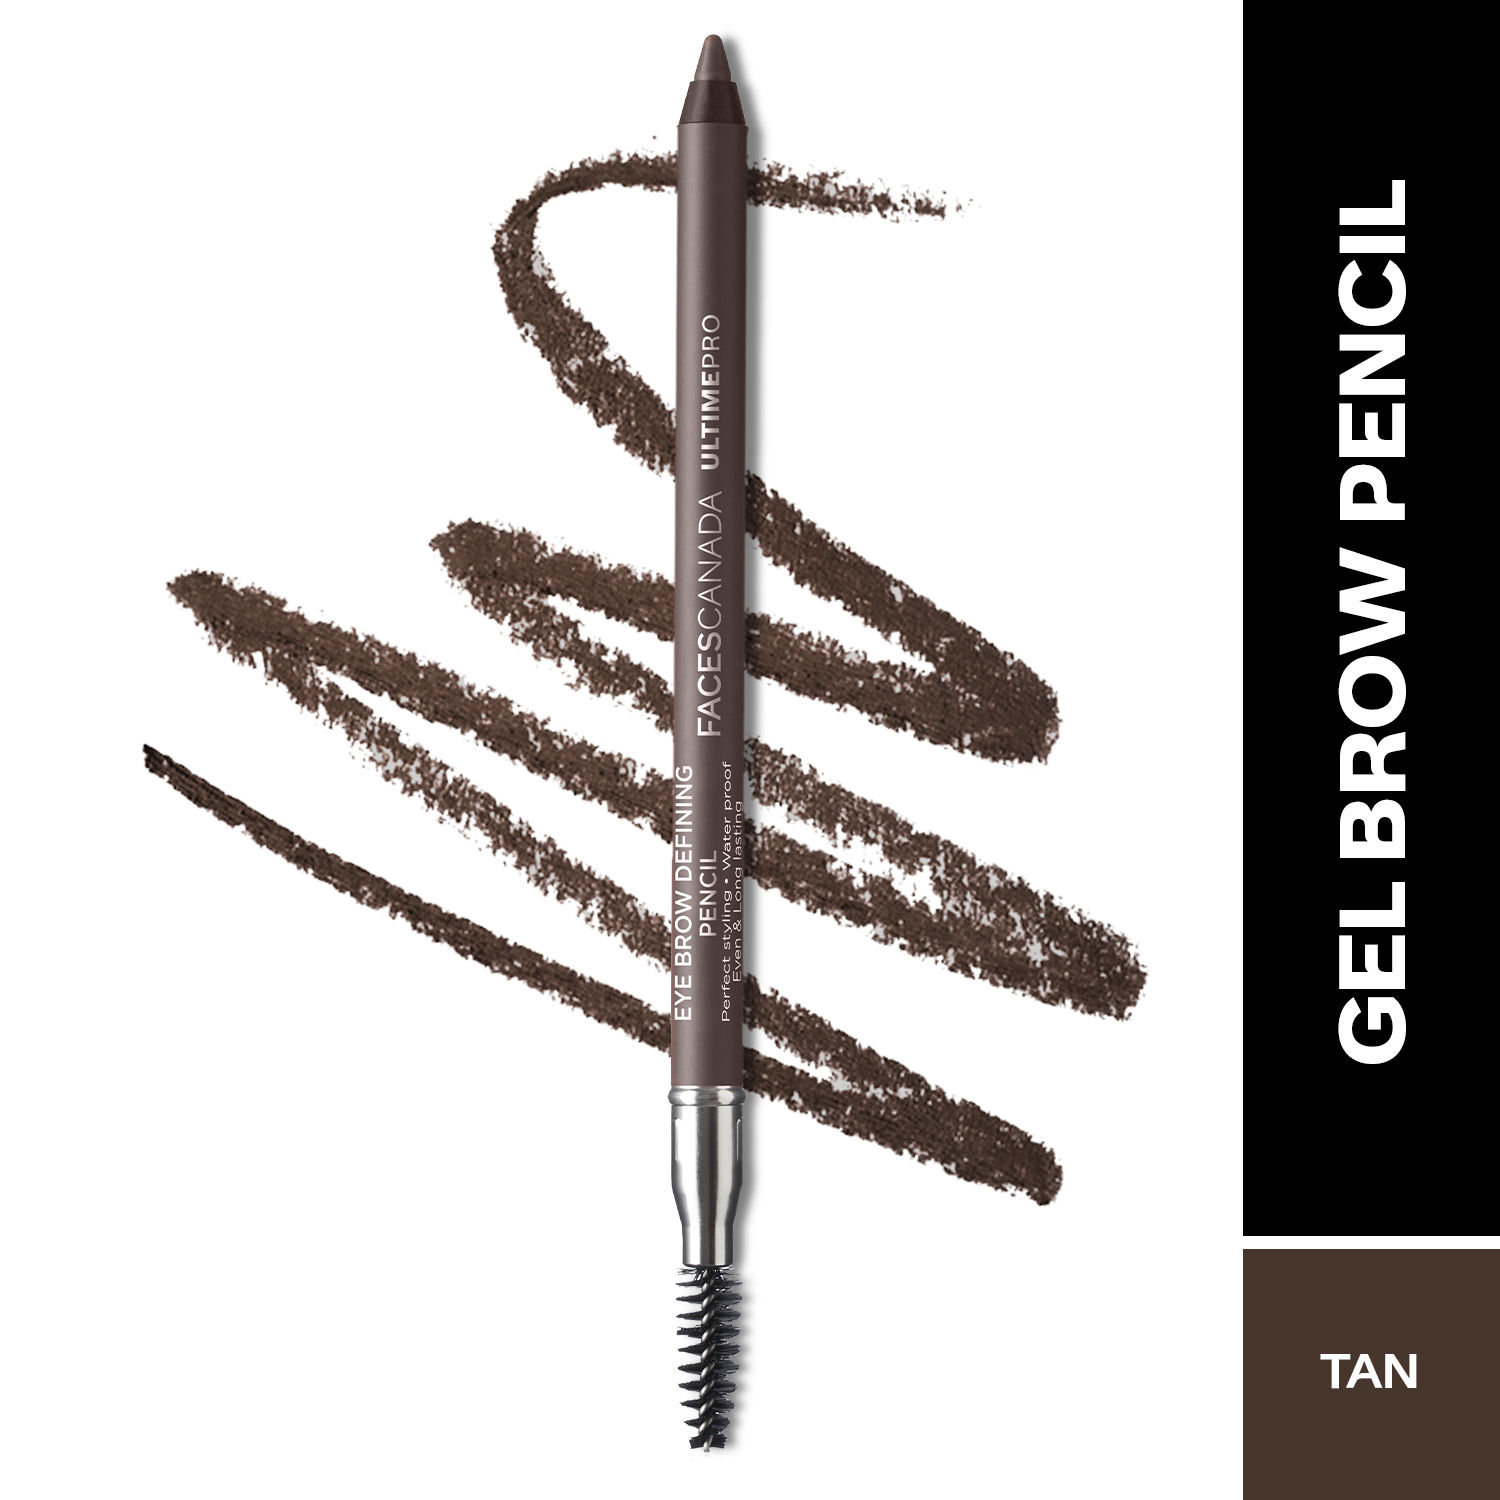 Buy FACES CANADA Ultime Pro Eyebrow Defining Pencil - Tan, 1.2g | Gel Gliding | Long Lasting | With Spoolie Brush | Waterproof, Transferproof & Smudgeproof - Purplle